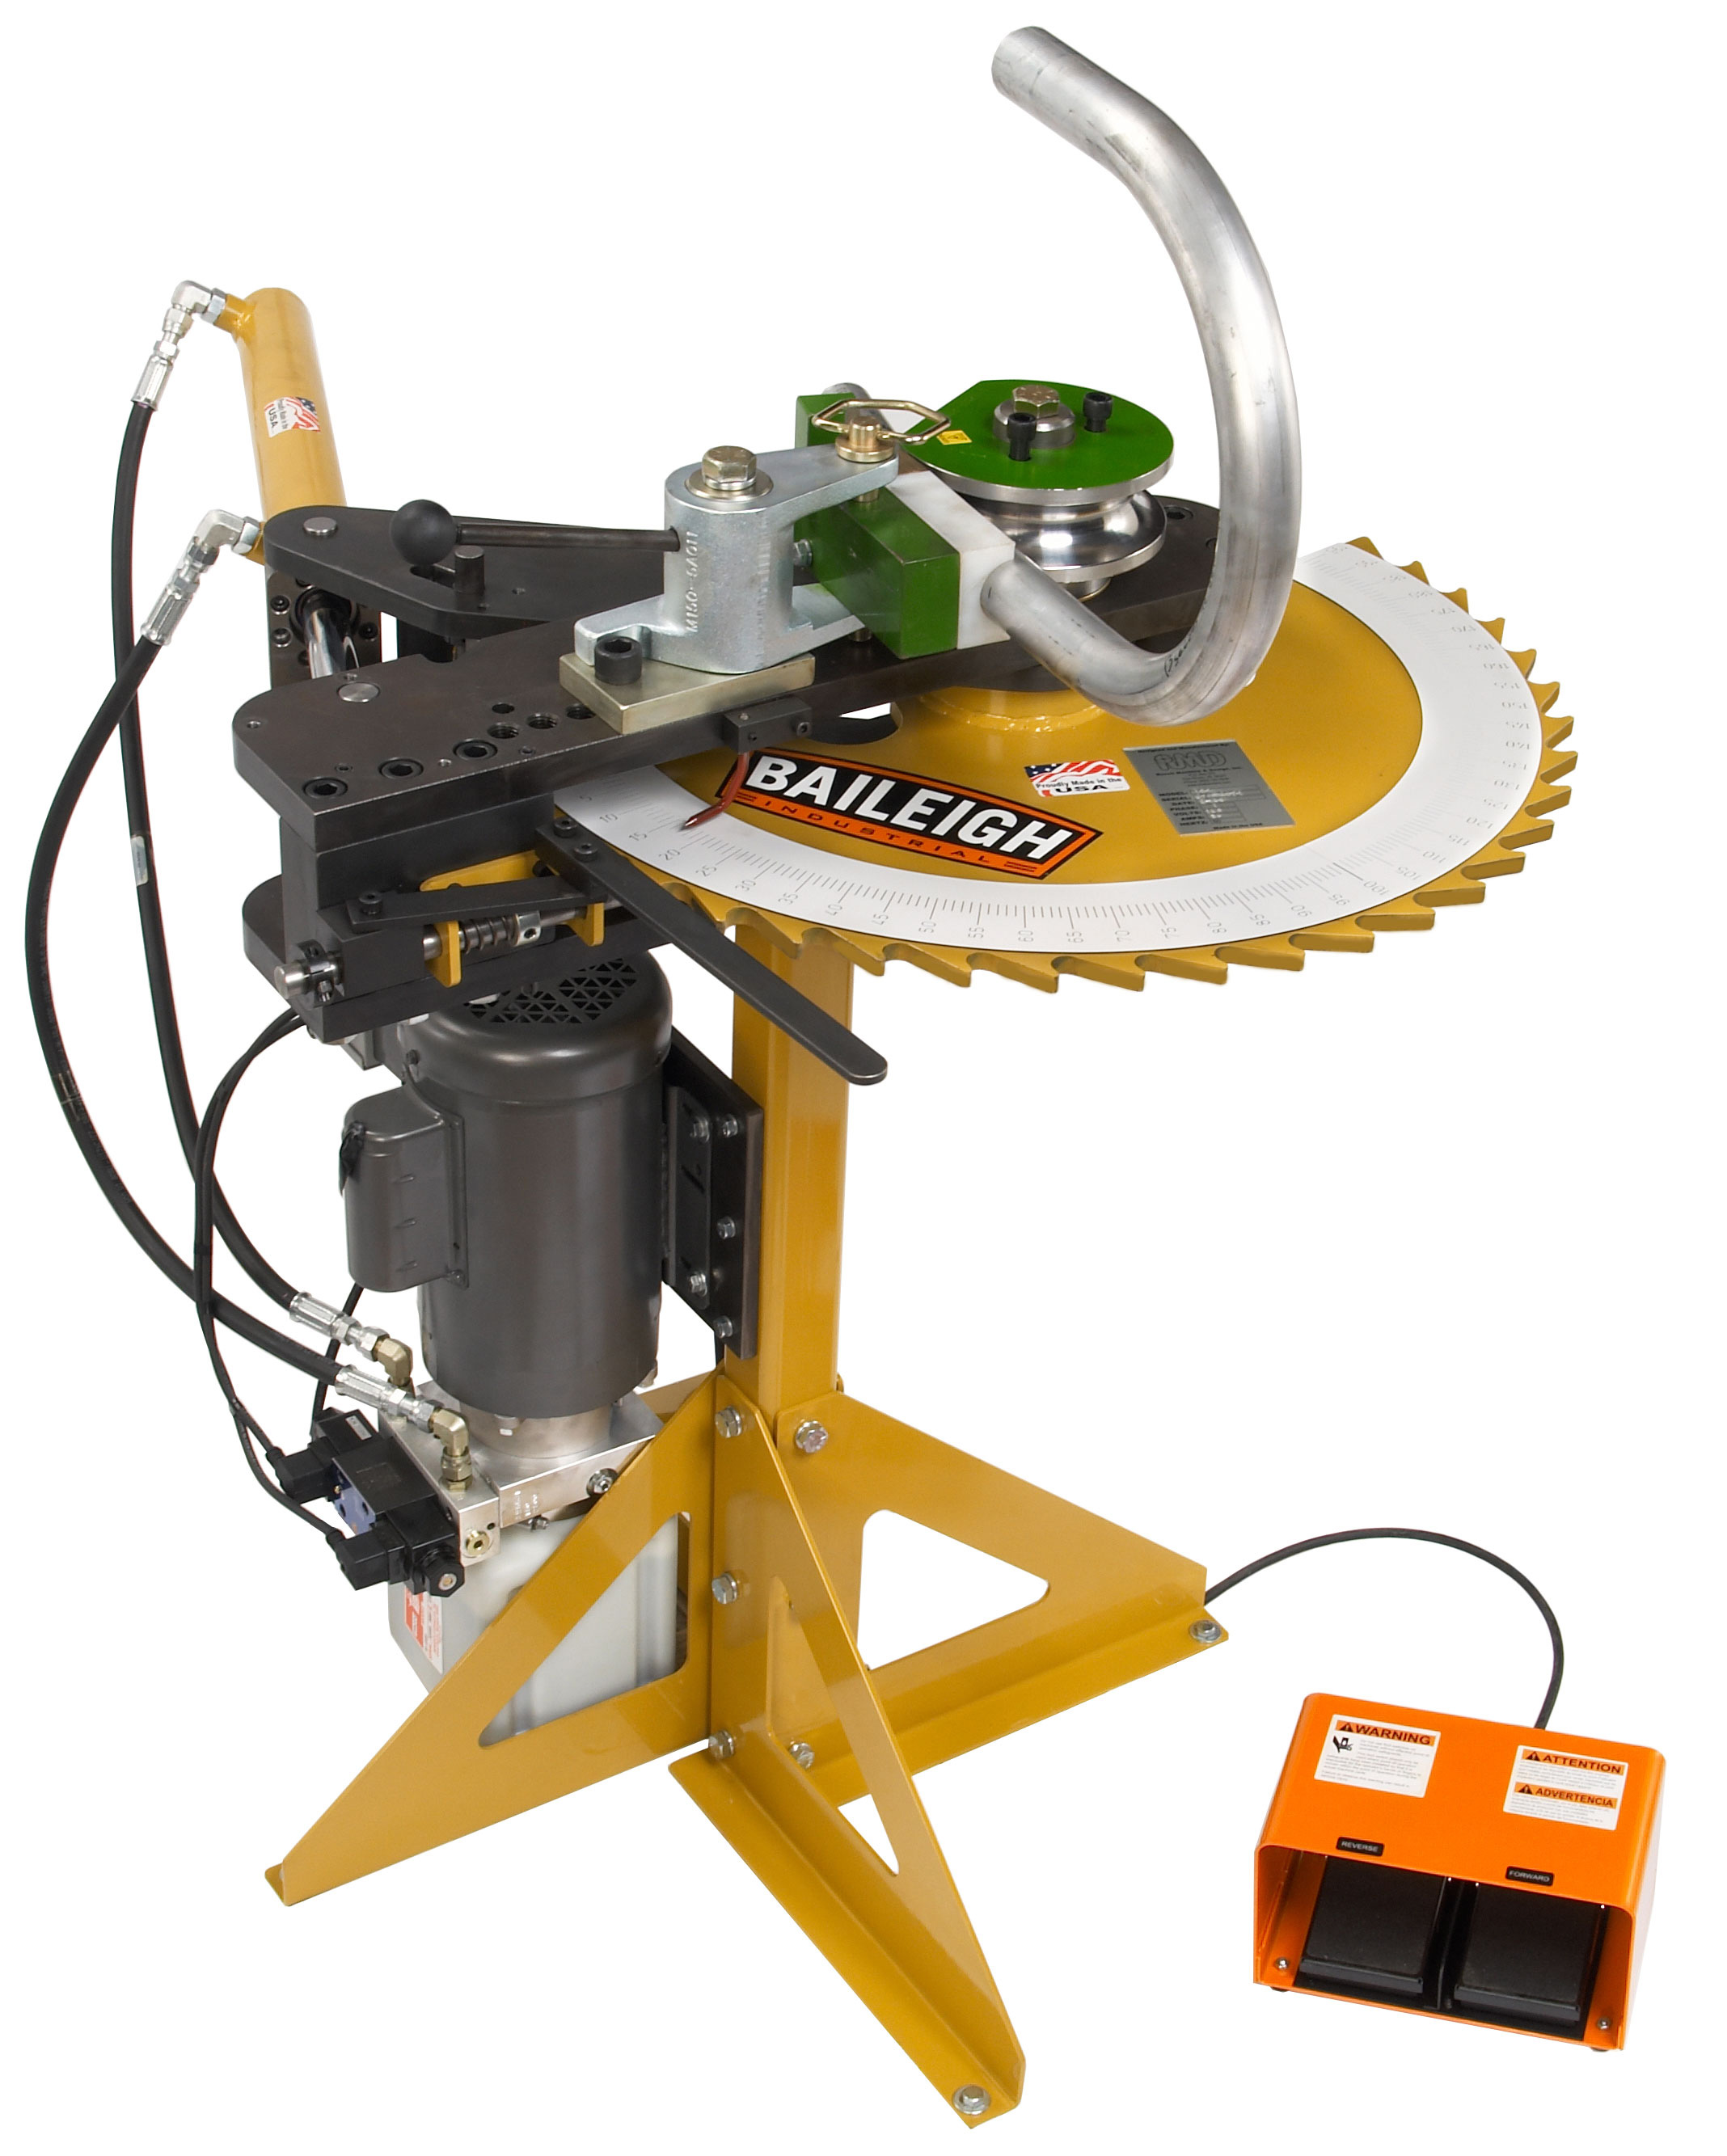 Baileigh RDB-125 Tube and Pipe Bender